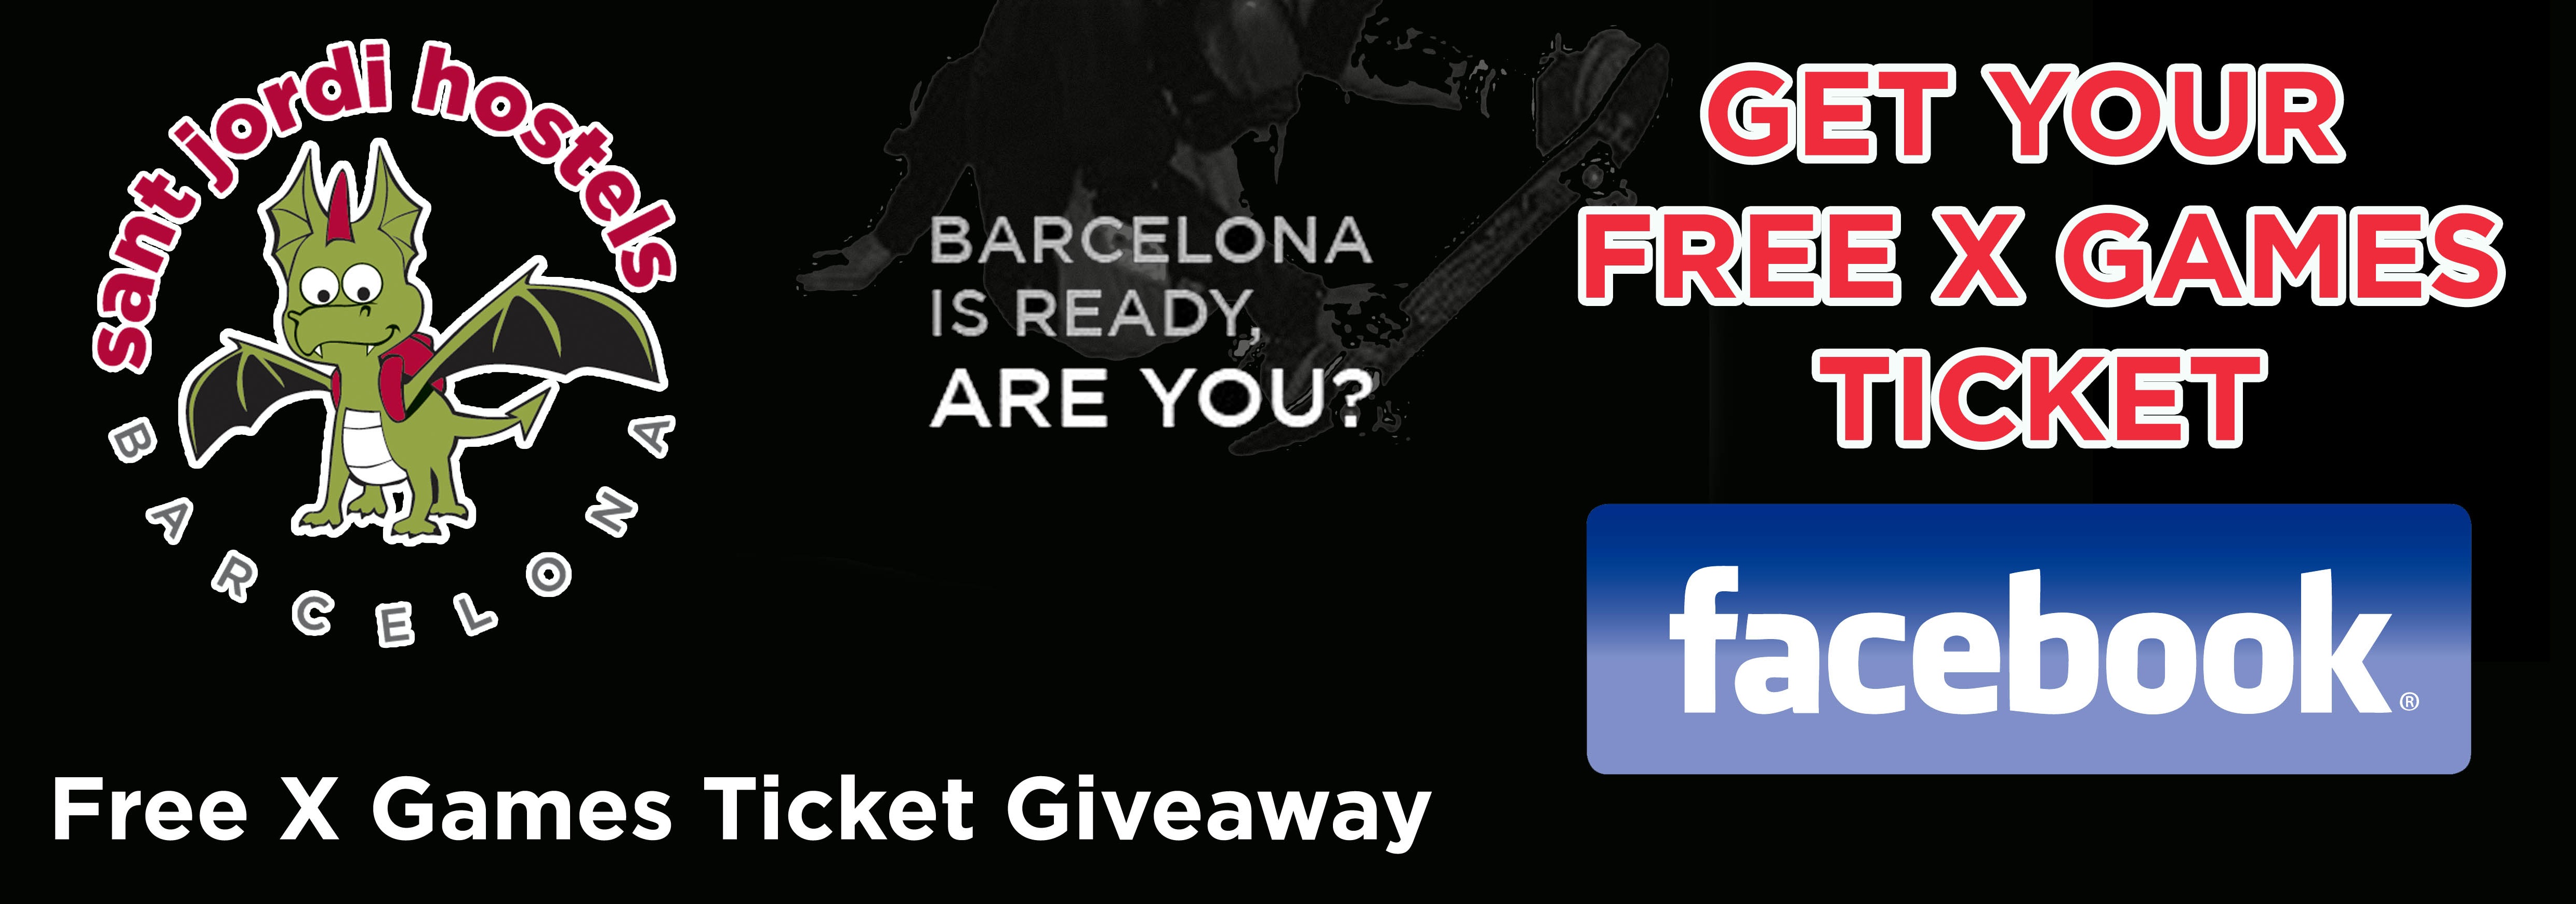 free x games barcelona ticket giveaway